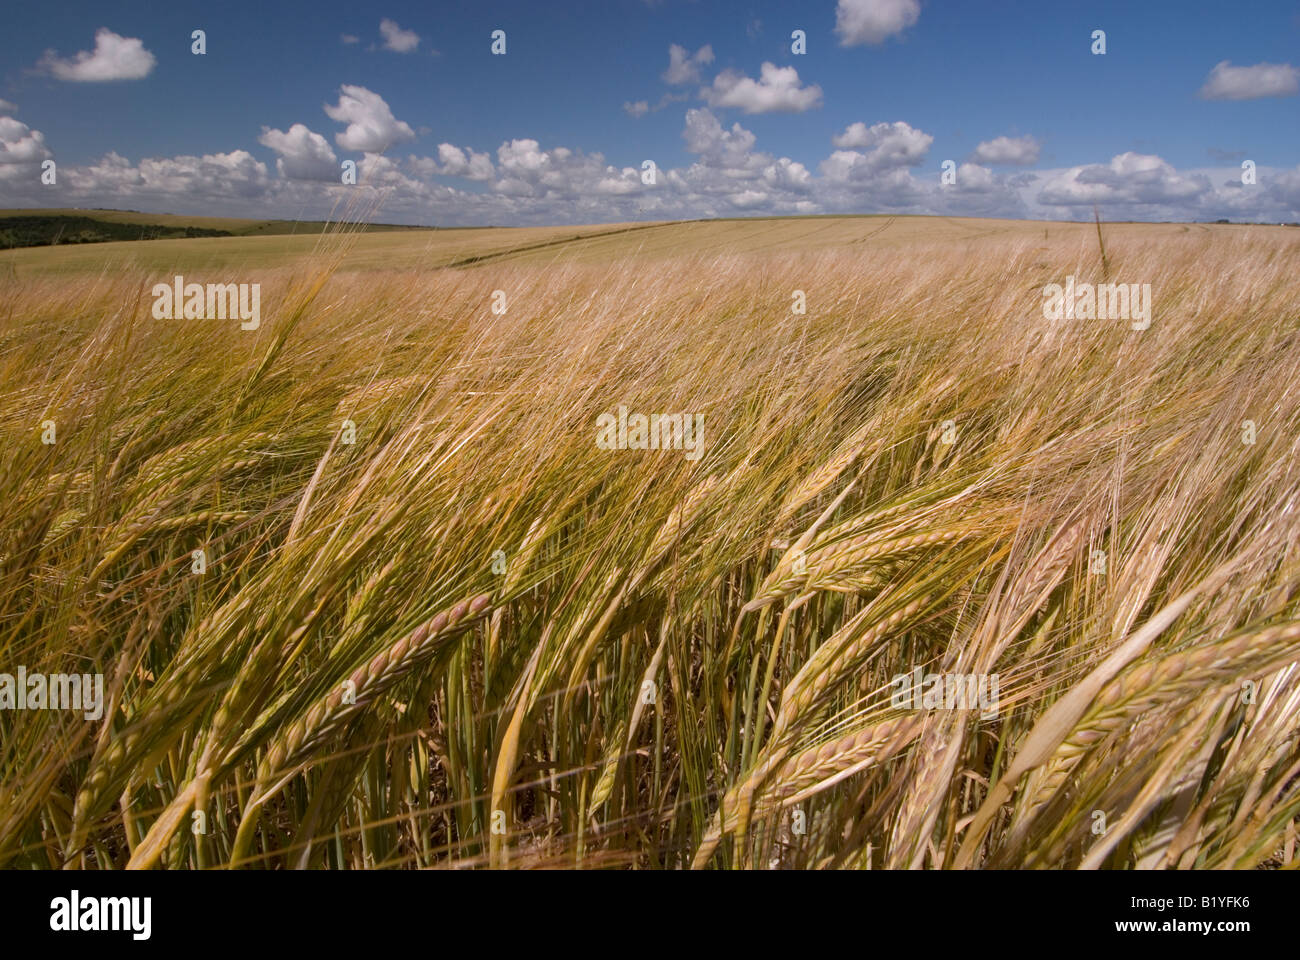 Barley corn growing in the South Downs, England Stock Photo